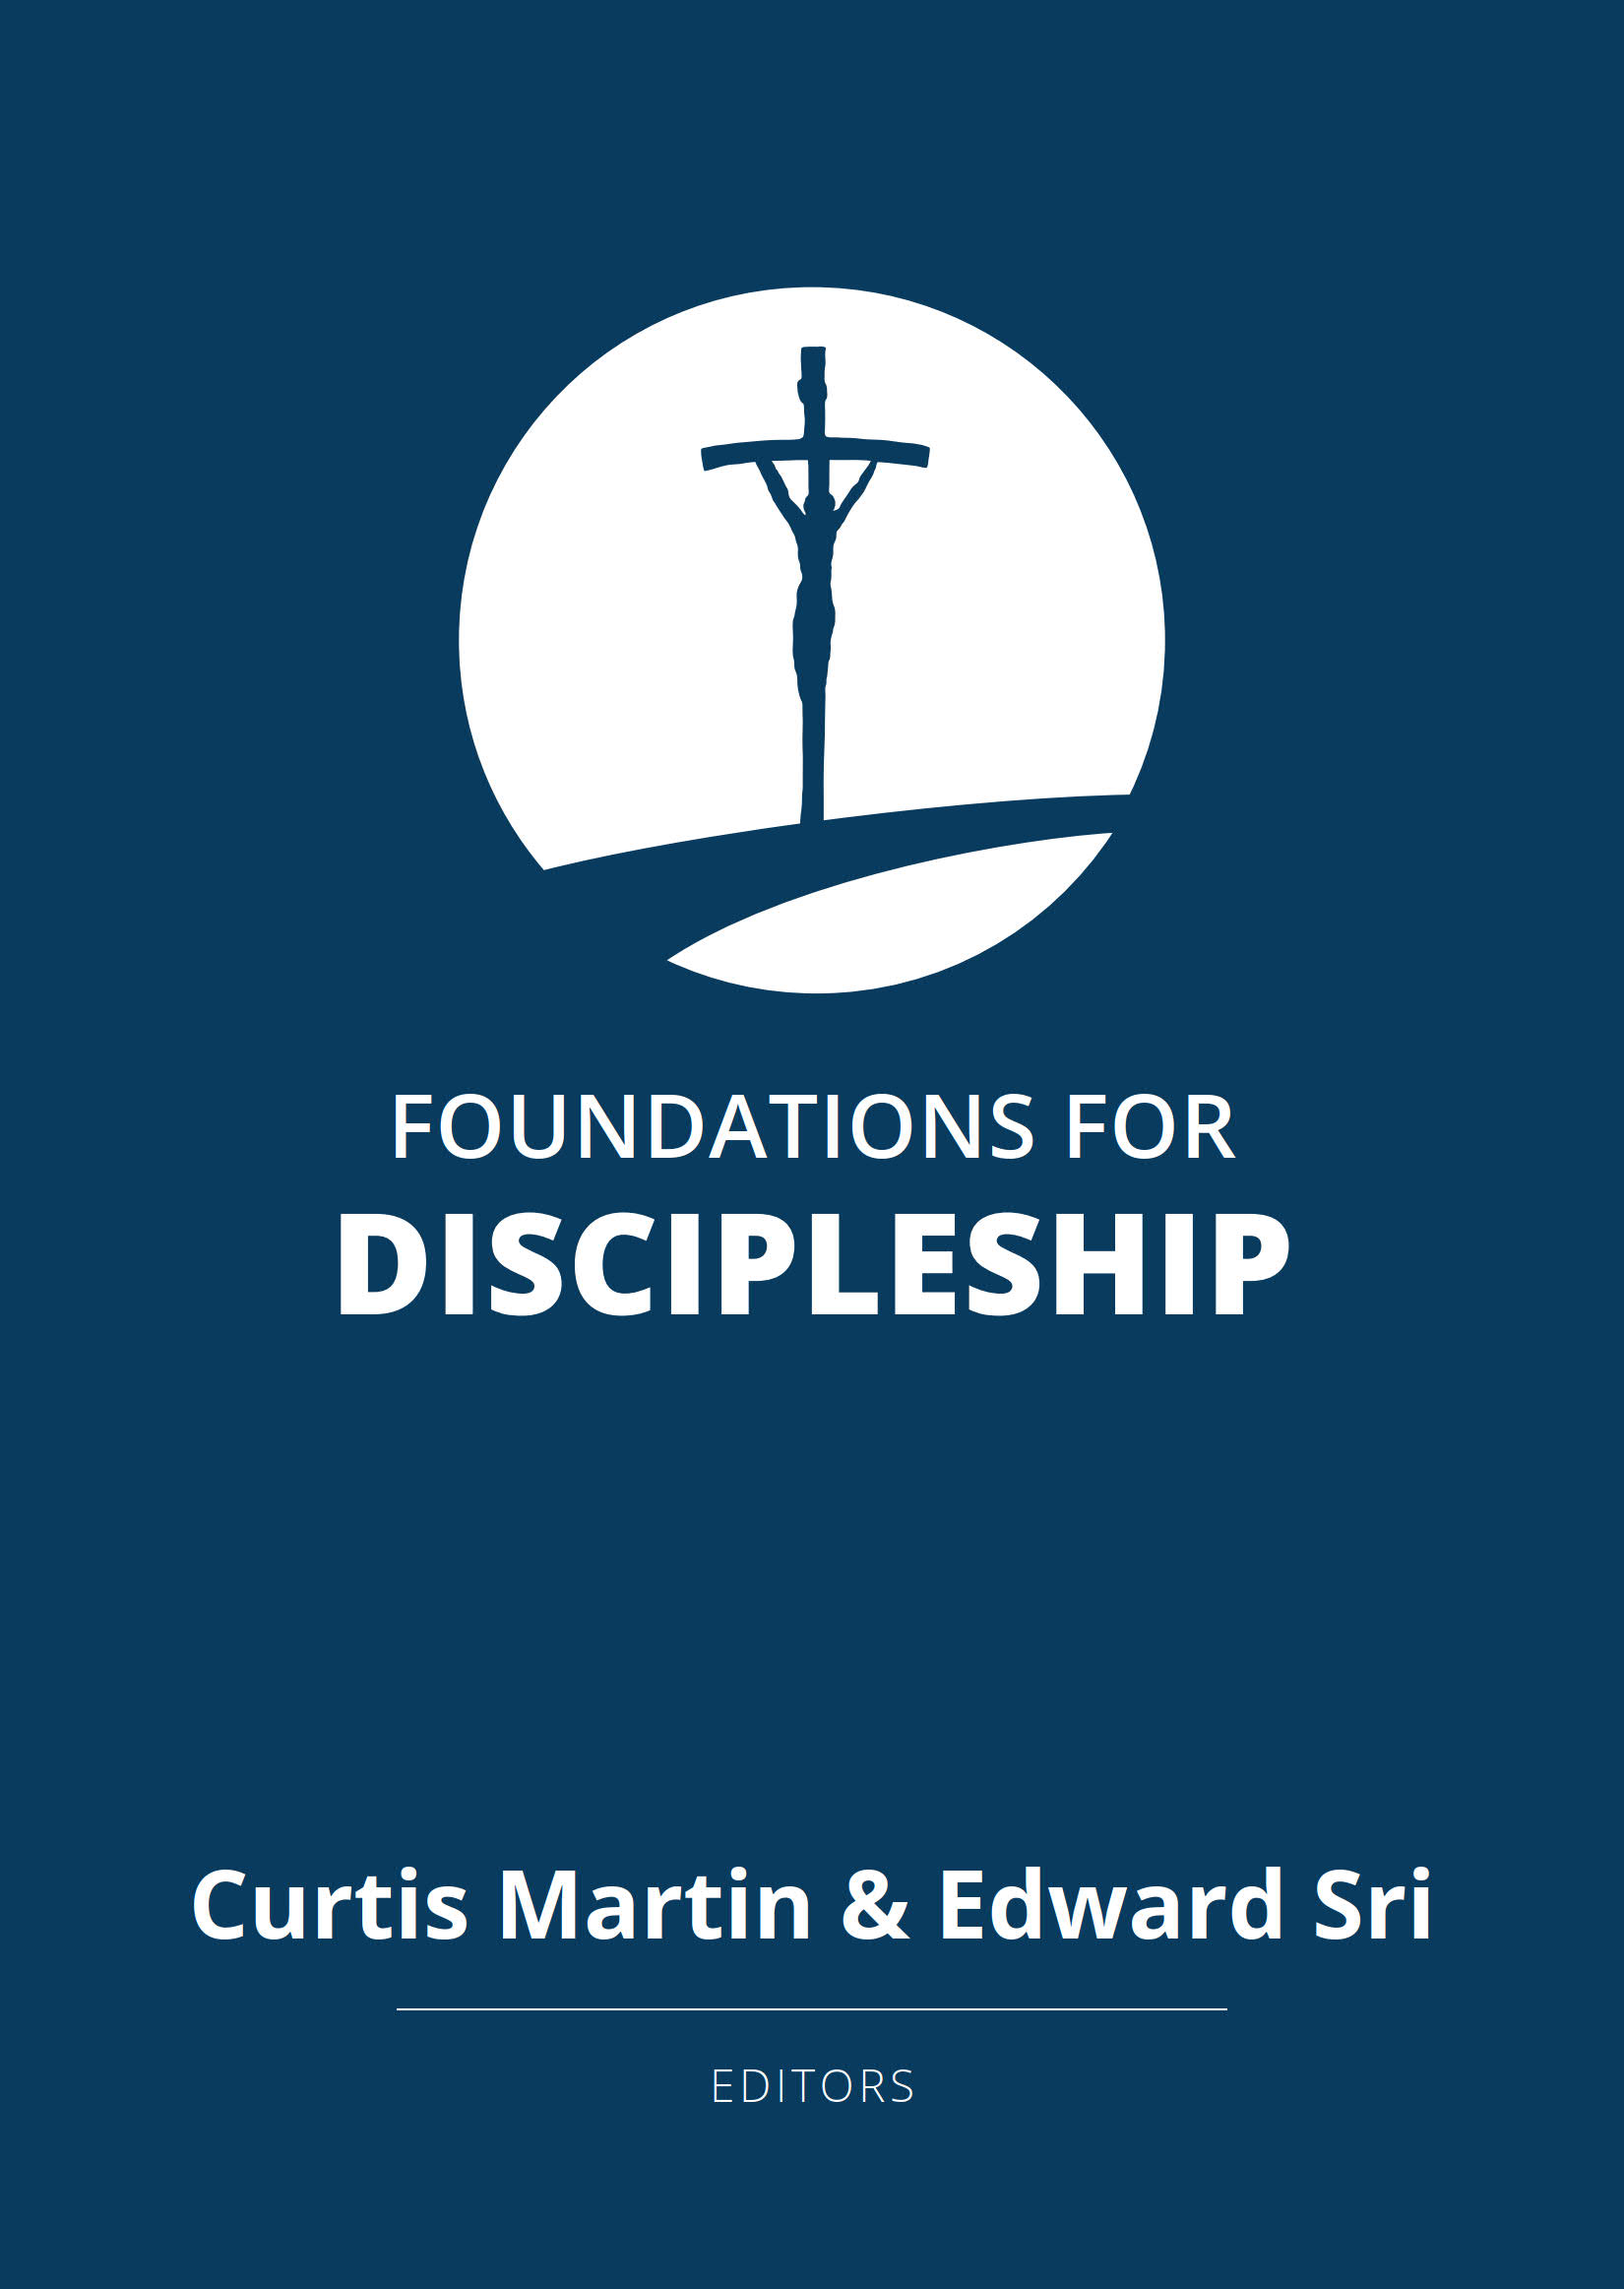 Foundations for Discipleship / Edited by Curtis Martin & Edward Sri